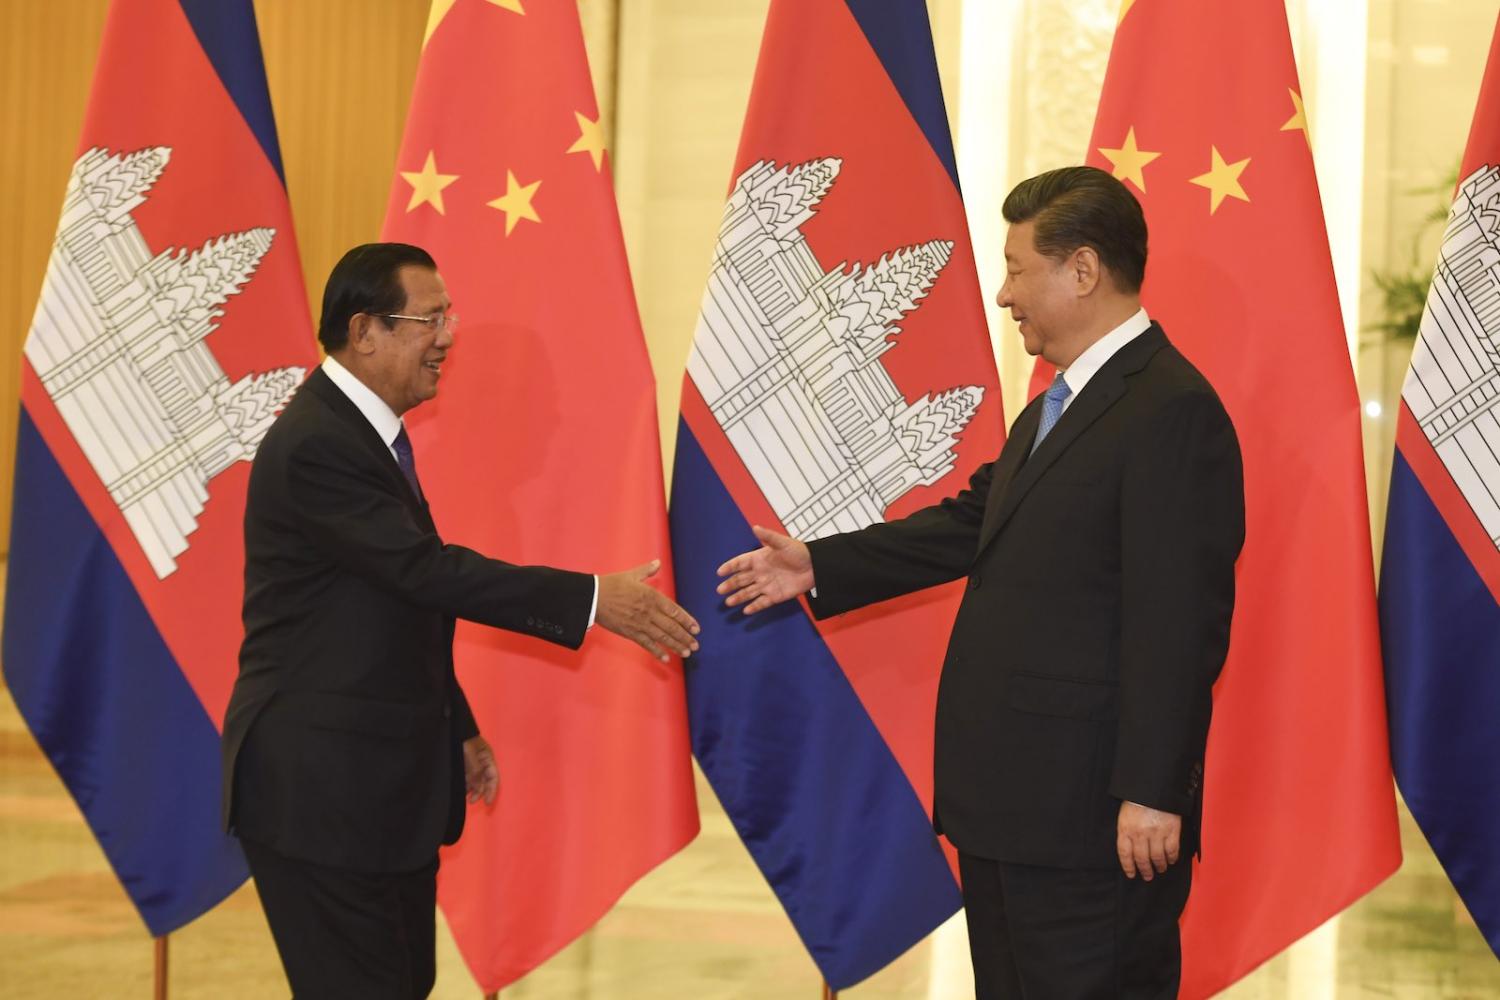 The deeper Sino-Cambodia relationship is certain to stir discomfort in the US, too (Photo: Madoka Ikegami via Getty)